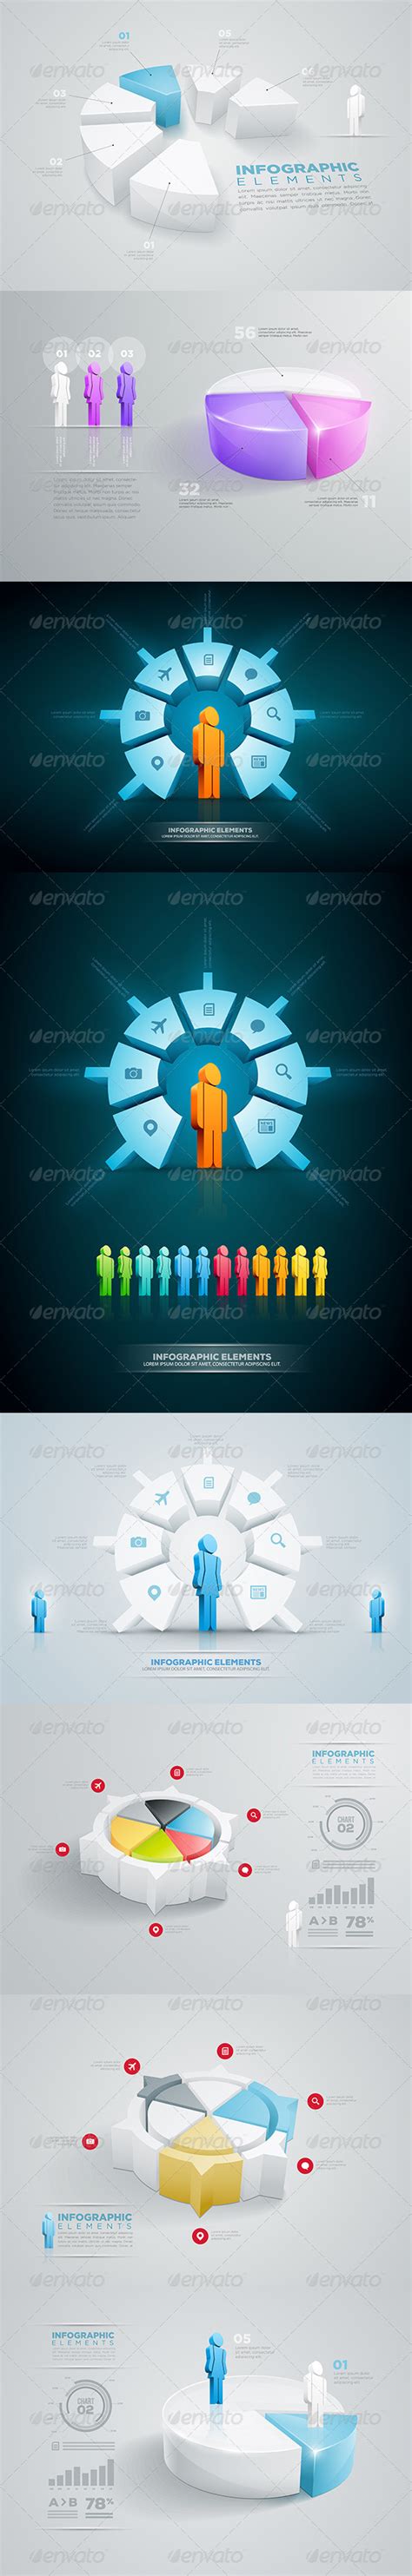 Pie Chart Infographic Collection by sgursozlu | GraphicRiver